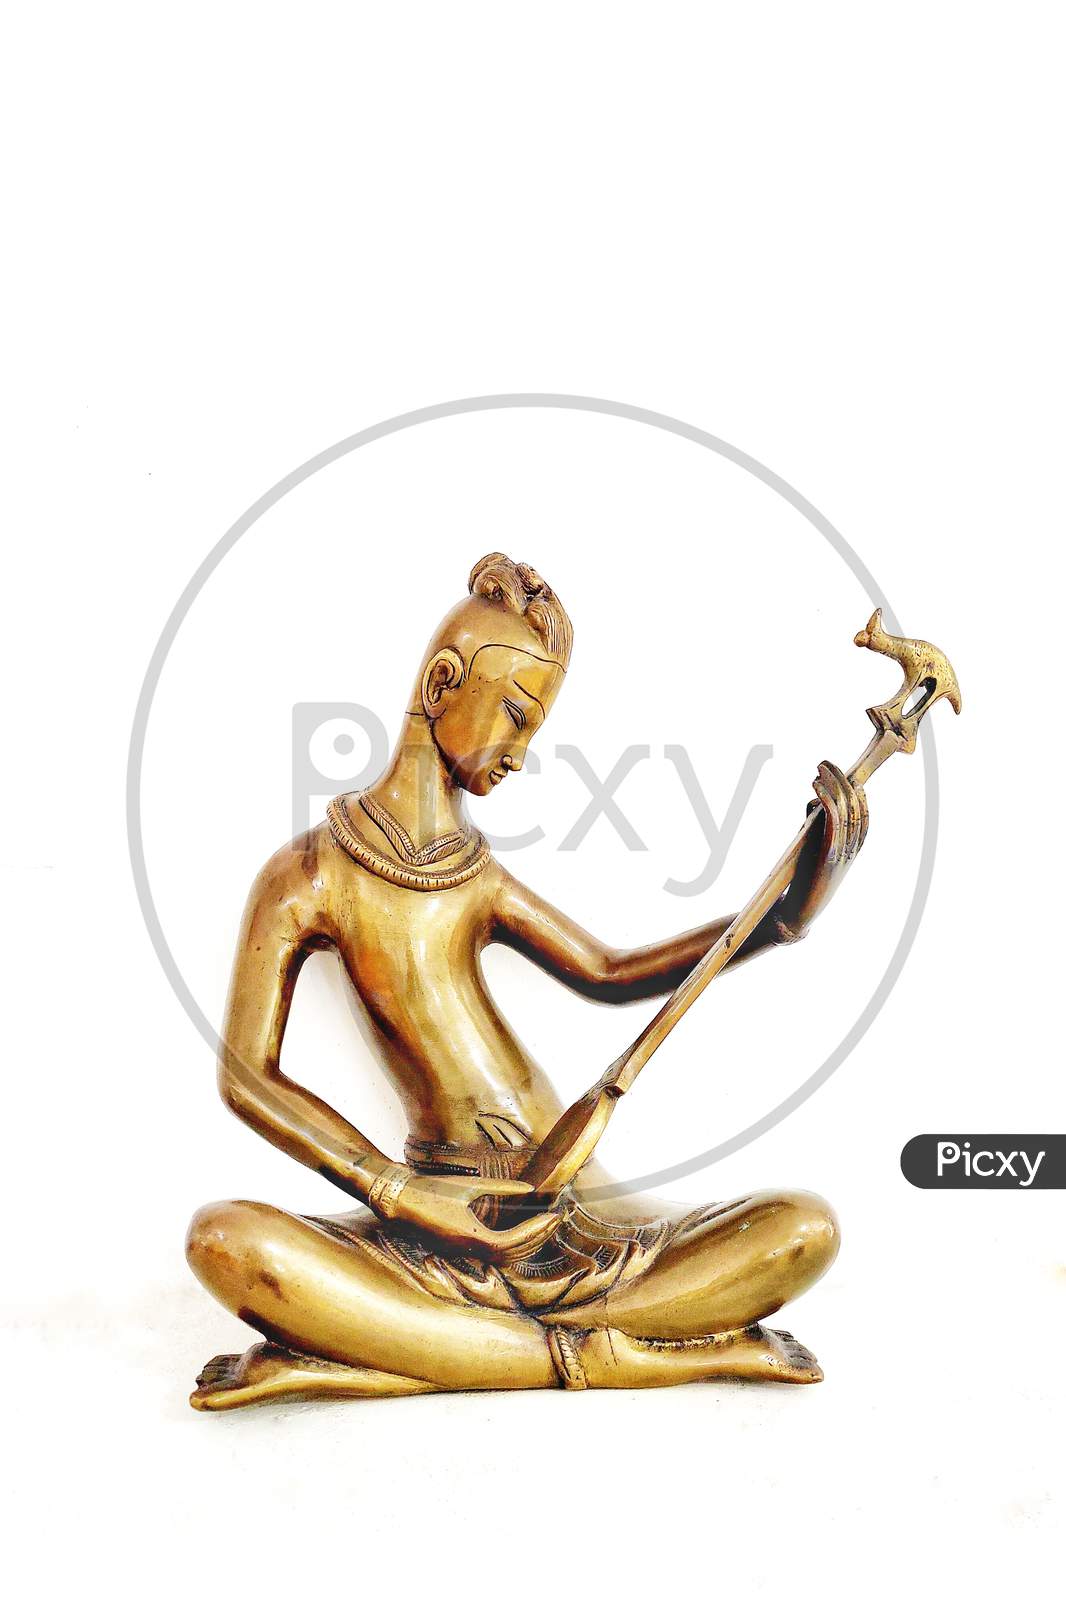 Brass Idols Of Indian Traditional Musicians  Over a White Background